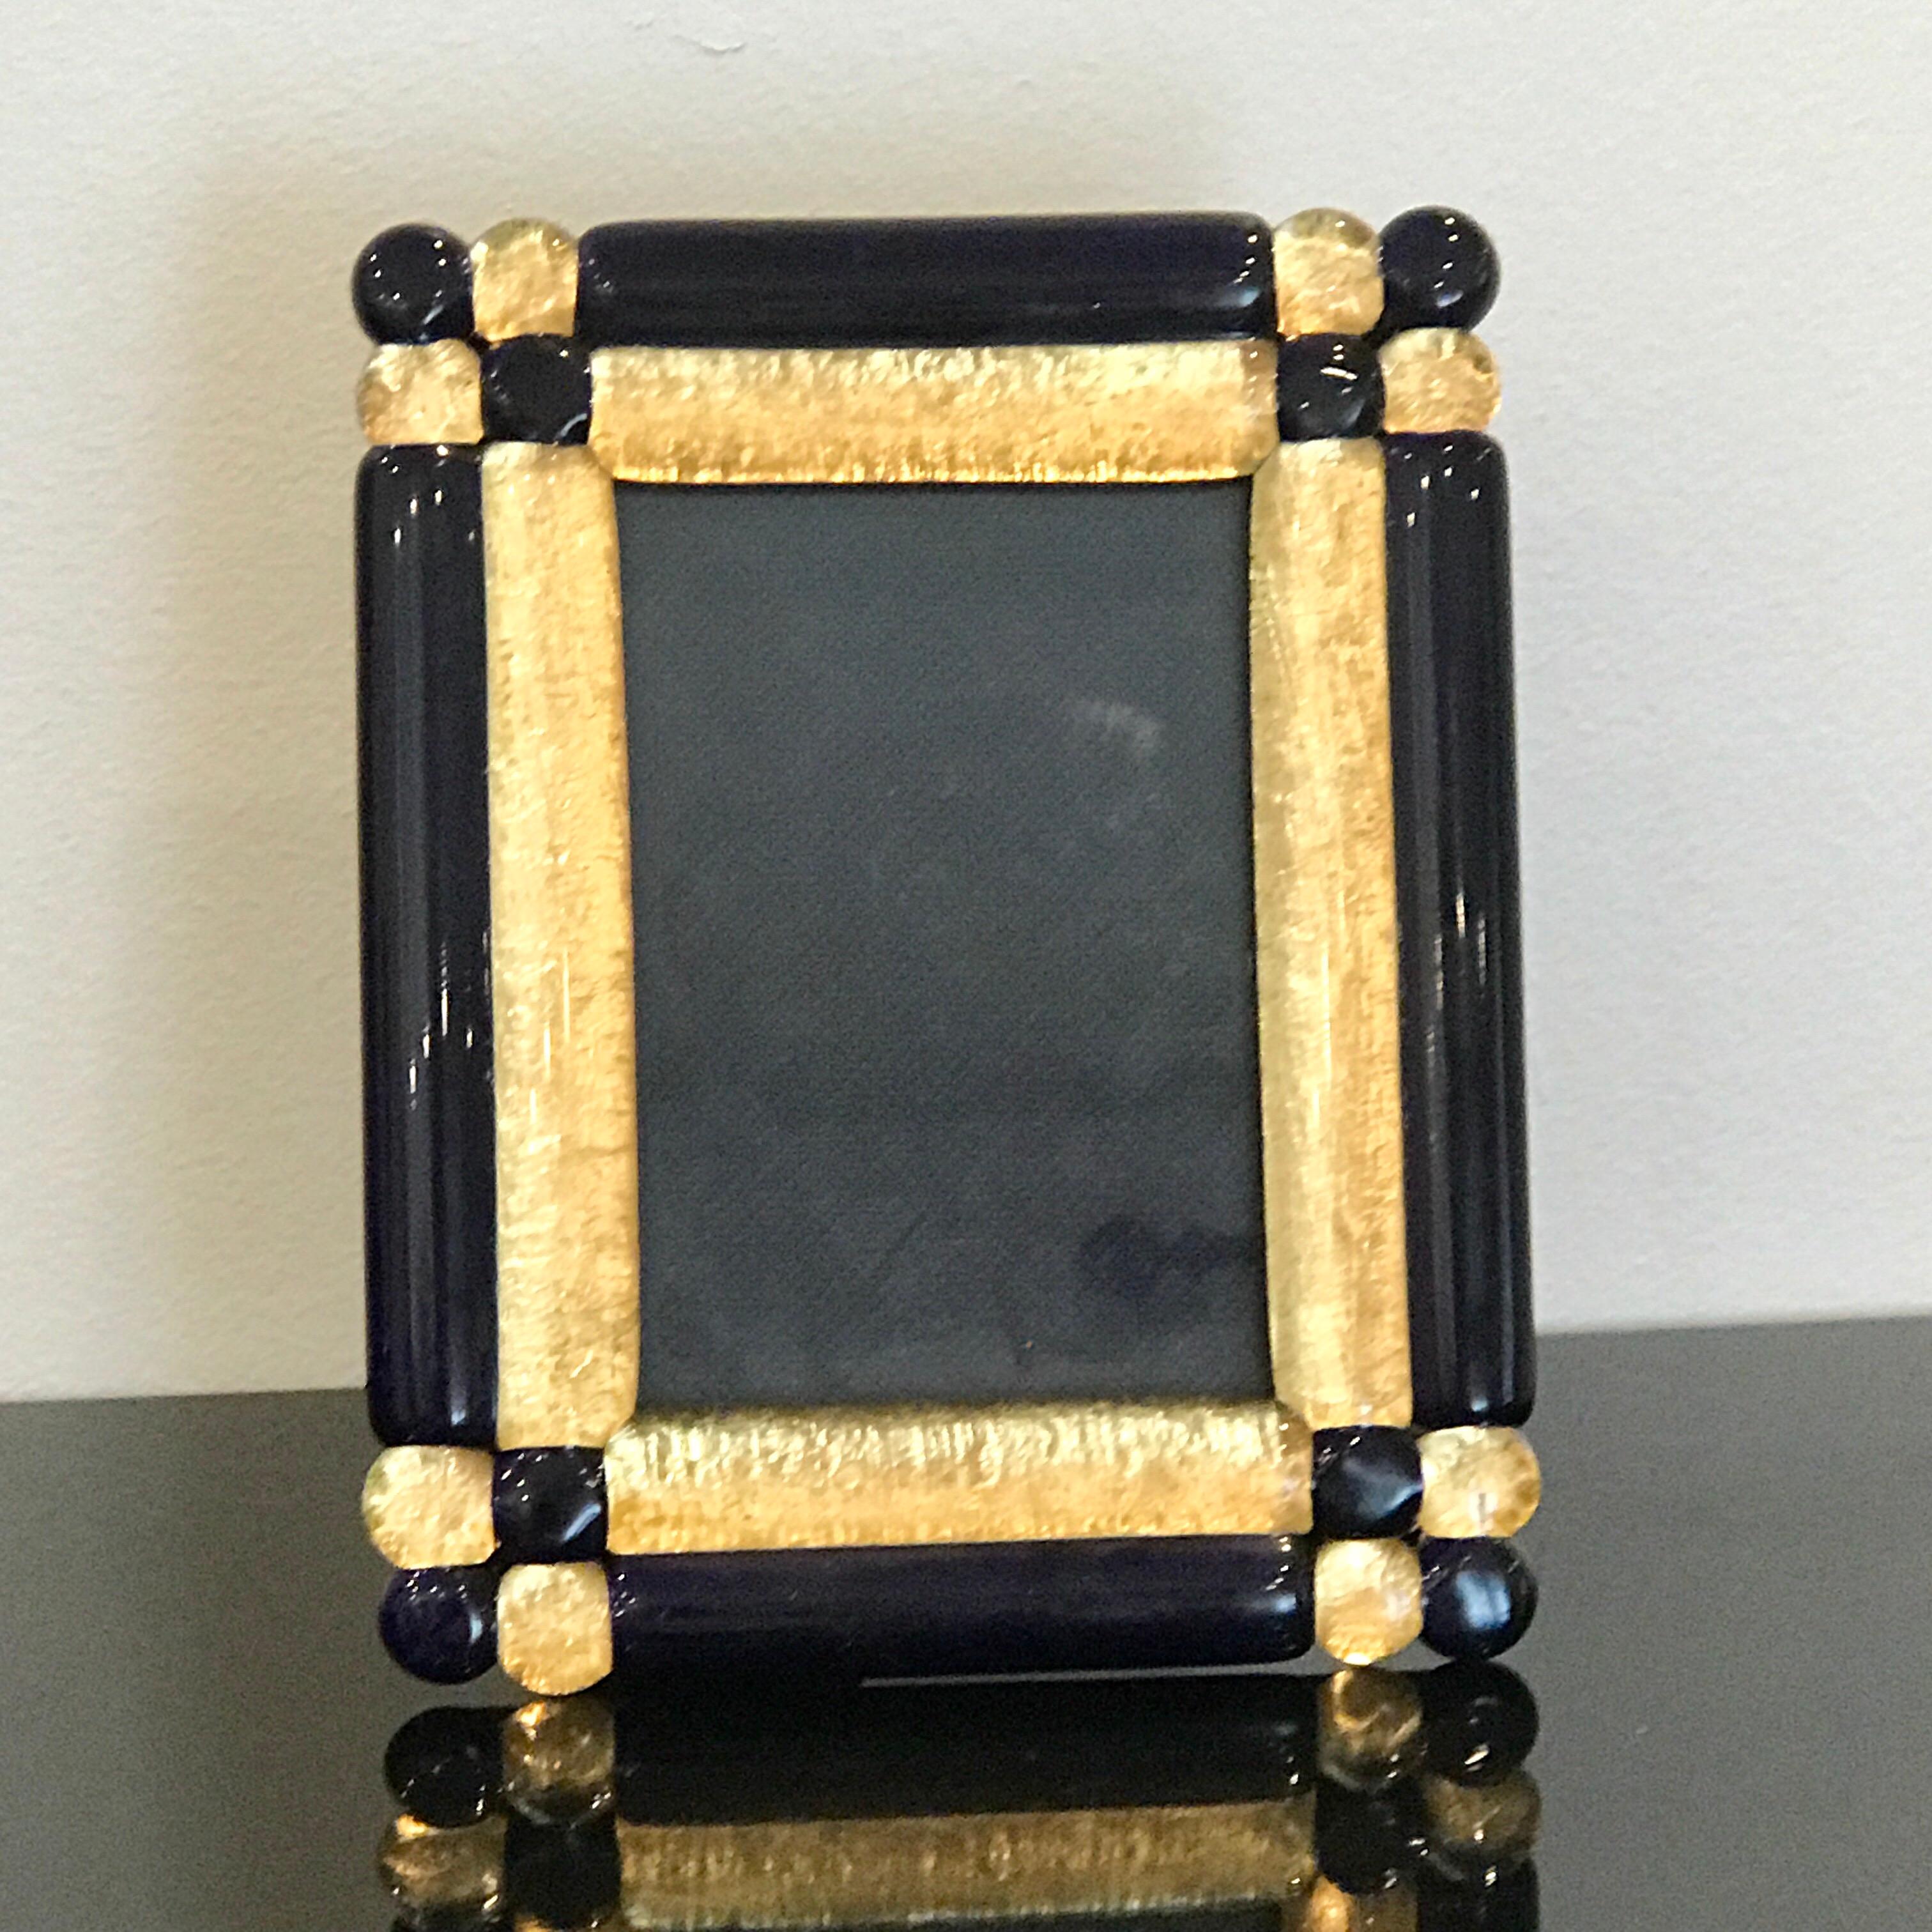 Cobalt and gold infused Murano glass picture frame, holds a 3.5